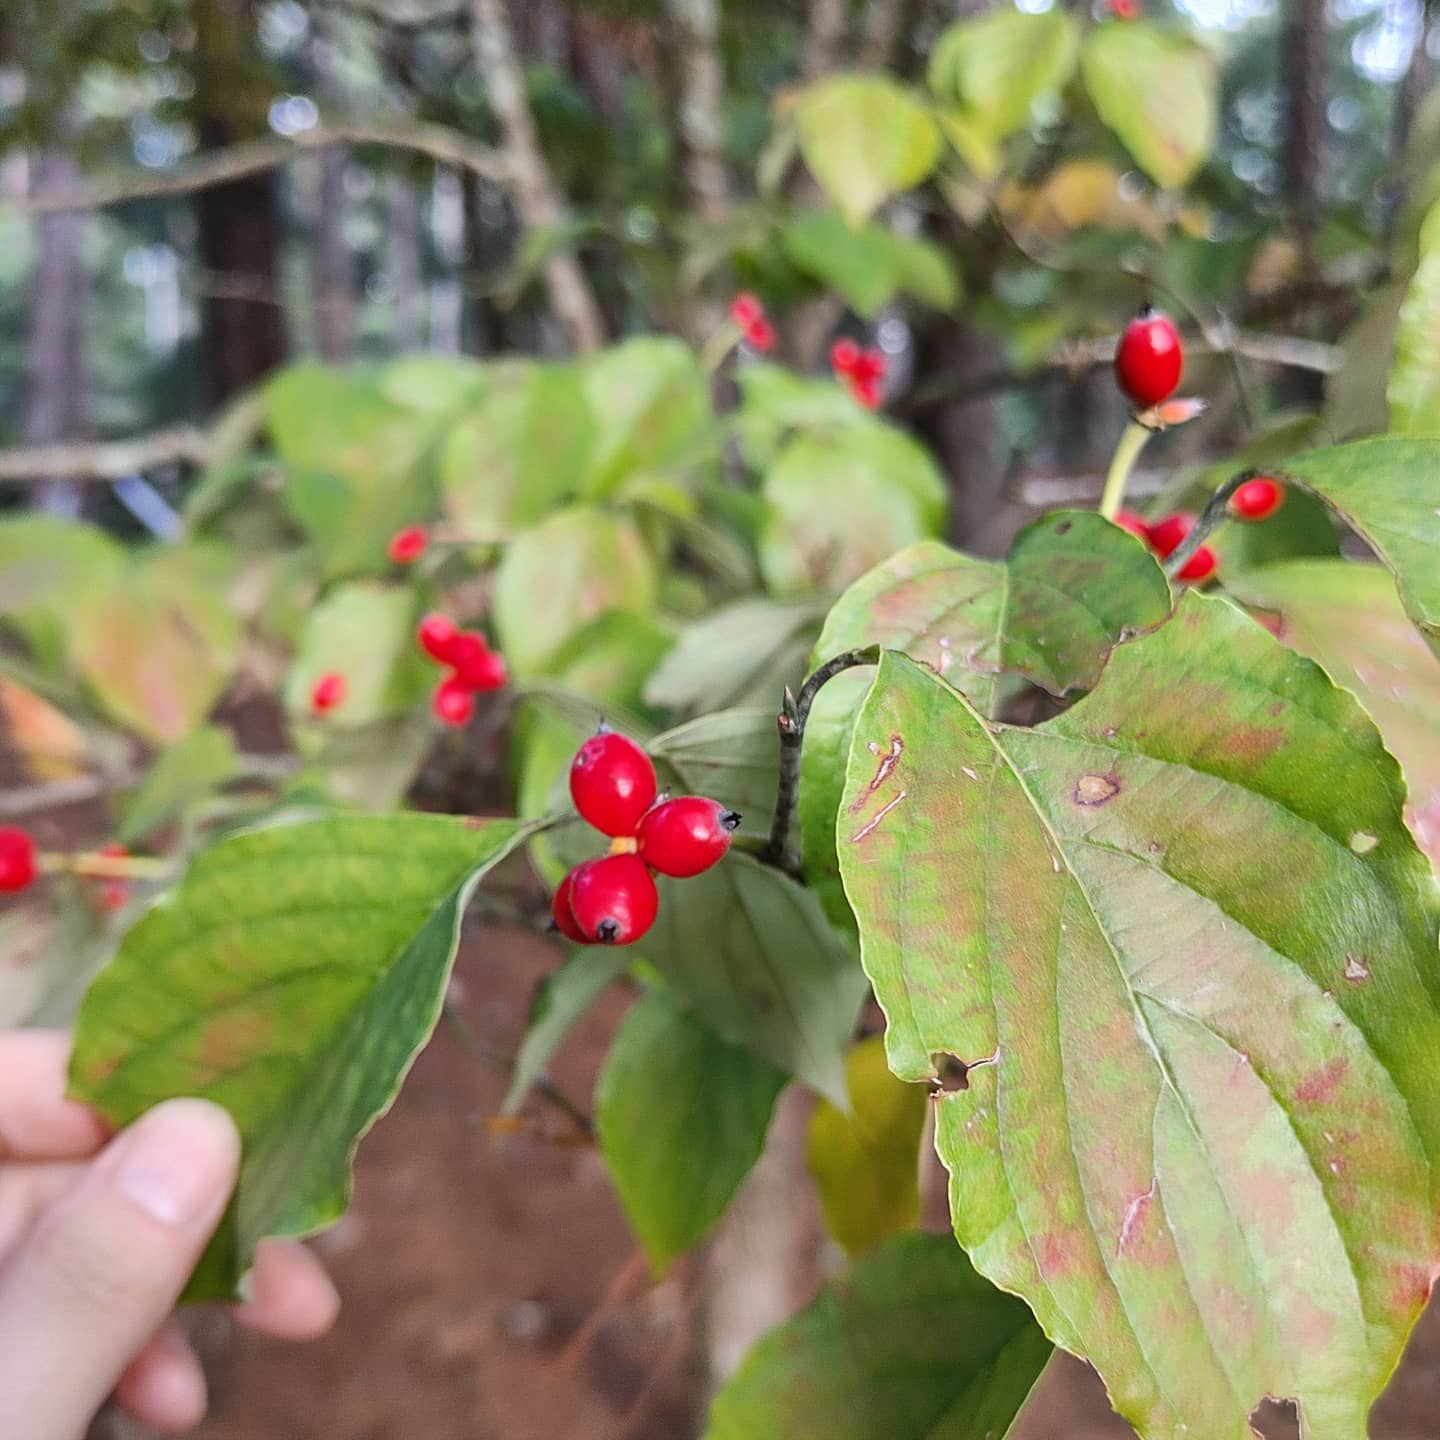 I guess the dogwood makes berries? I've never noticed these before!